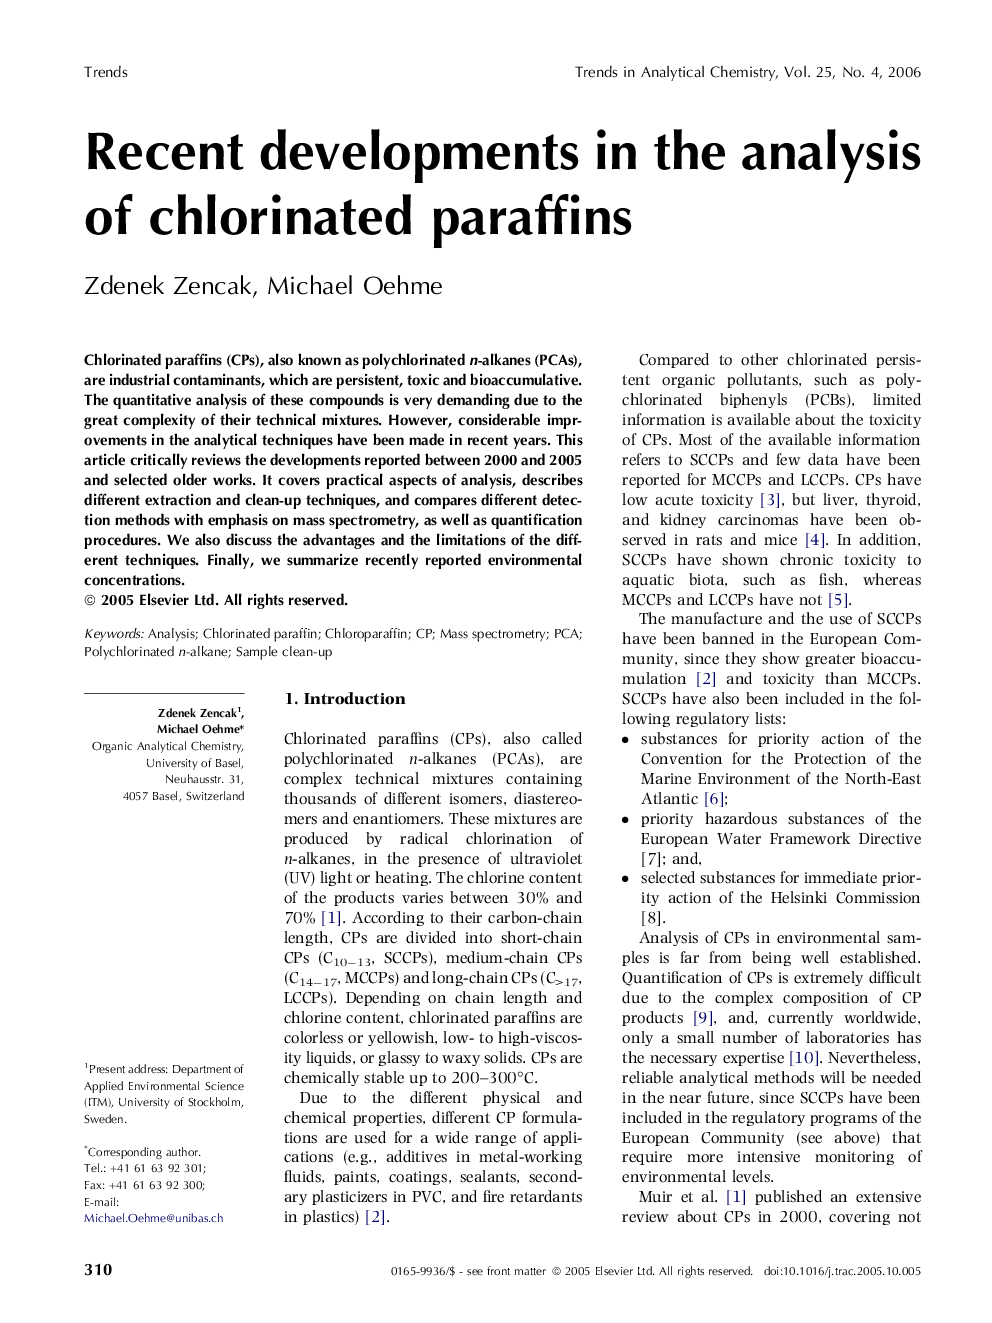 Recent developments in the analysis of chlorinated paraffins